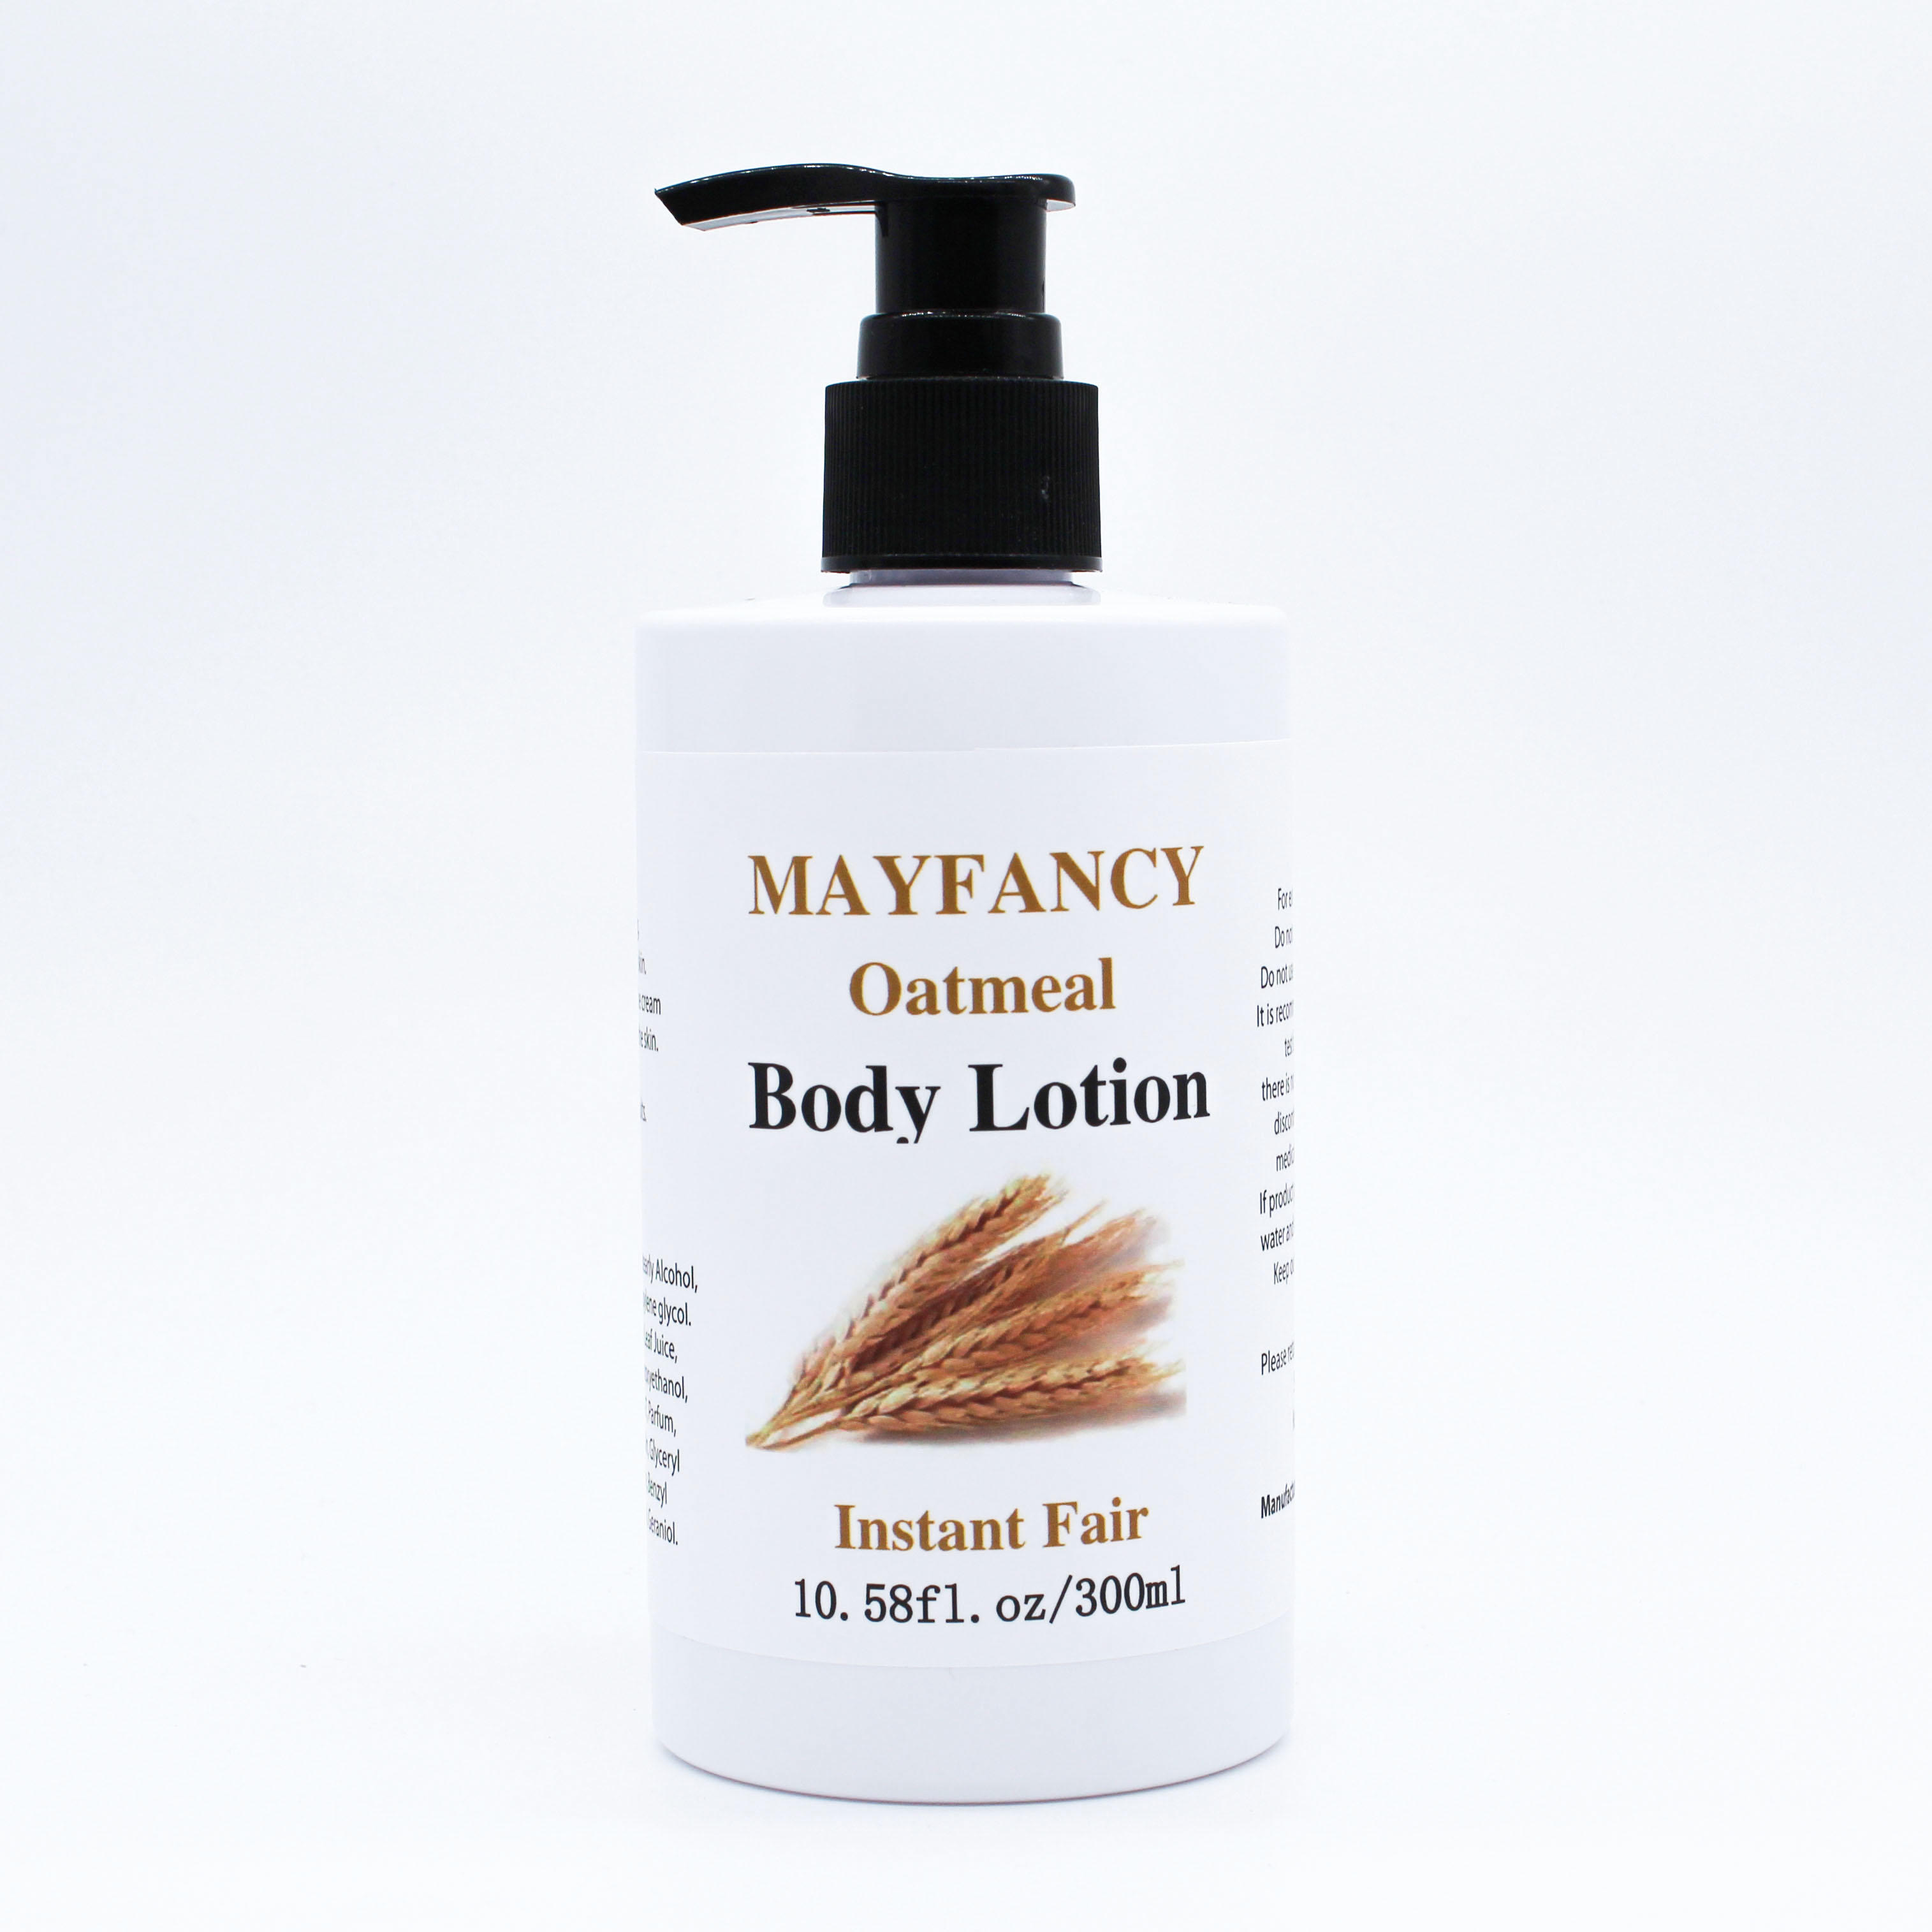 Mayfancy Oatmeal Body Soothing Lotion